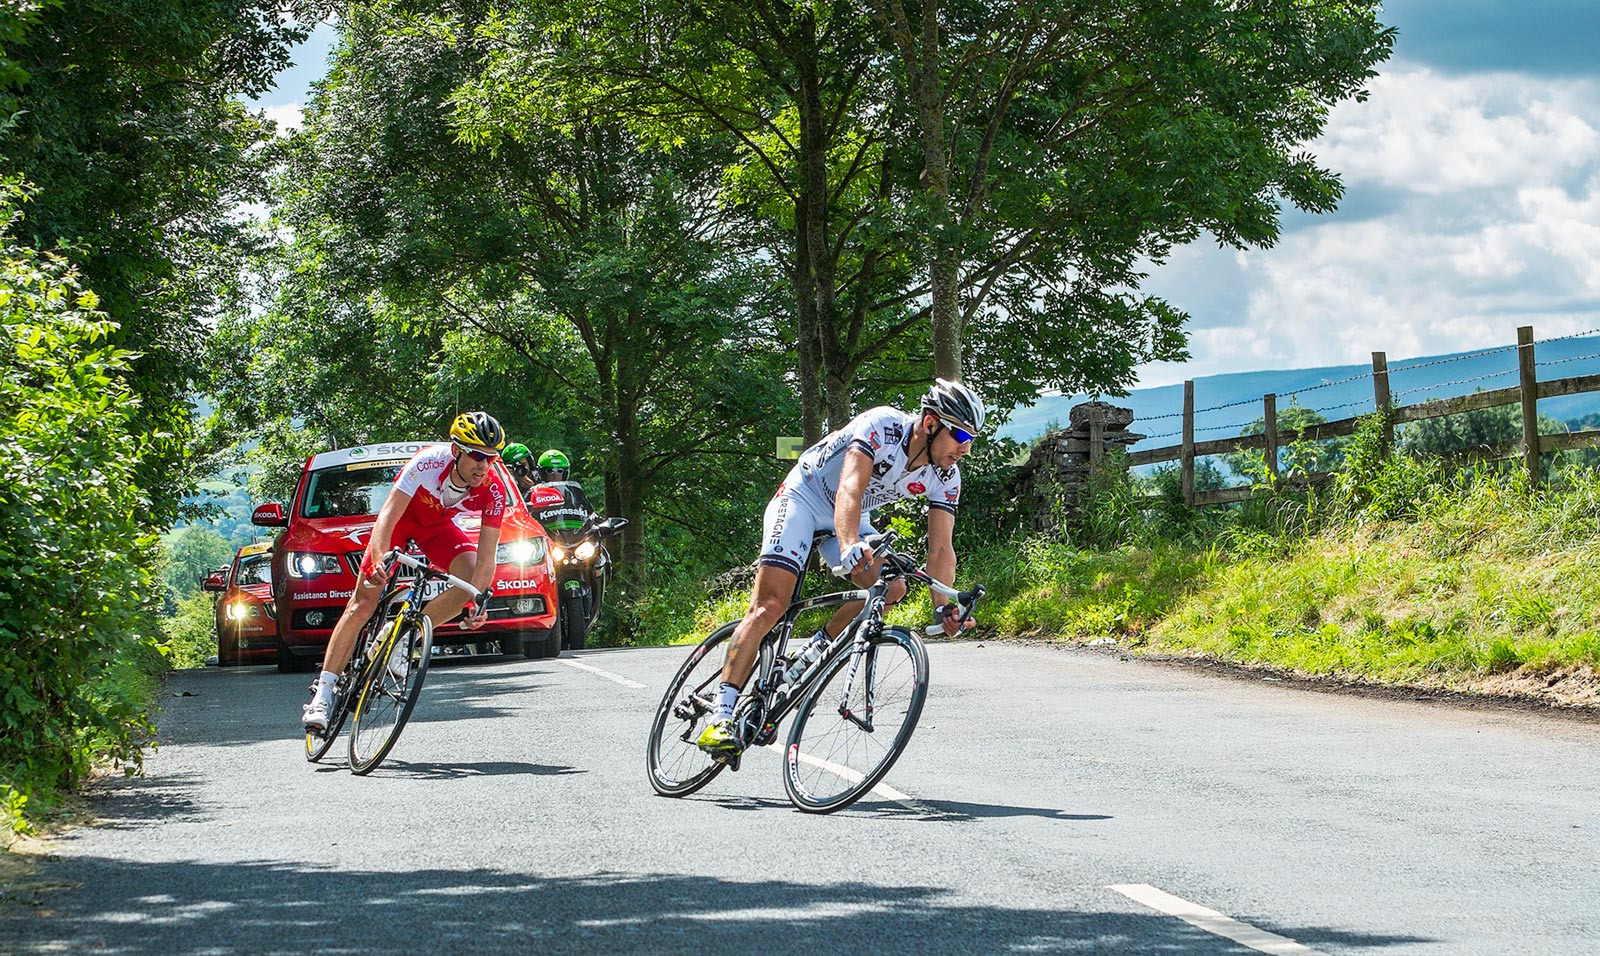 The other two cyclists in the break away pack at Aysgarth